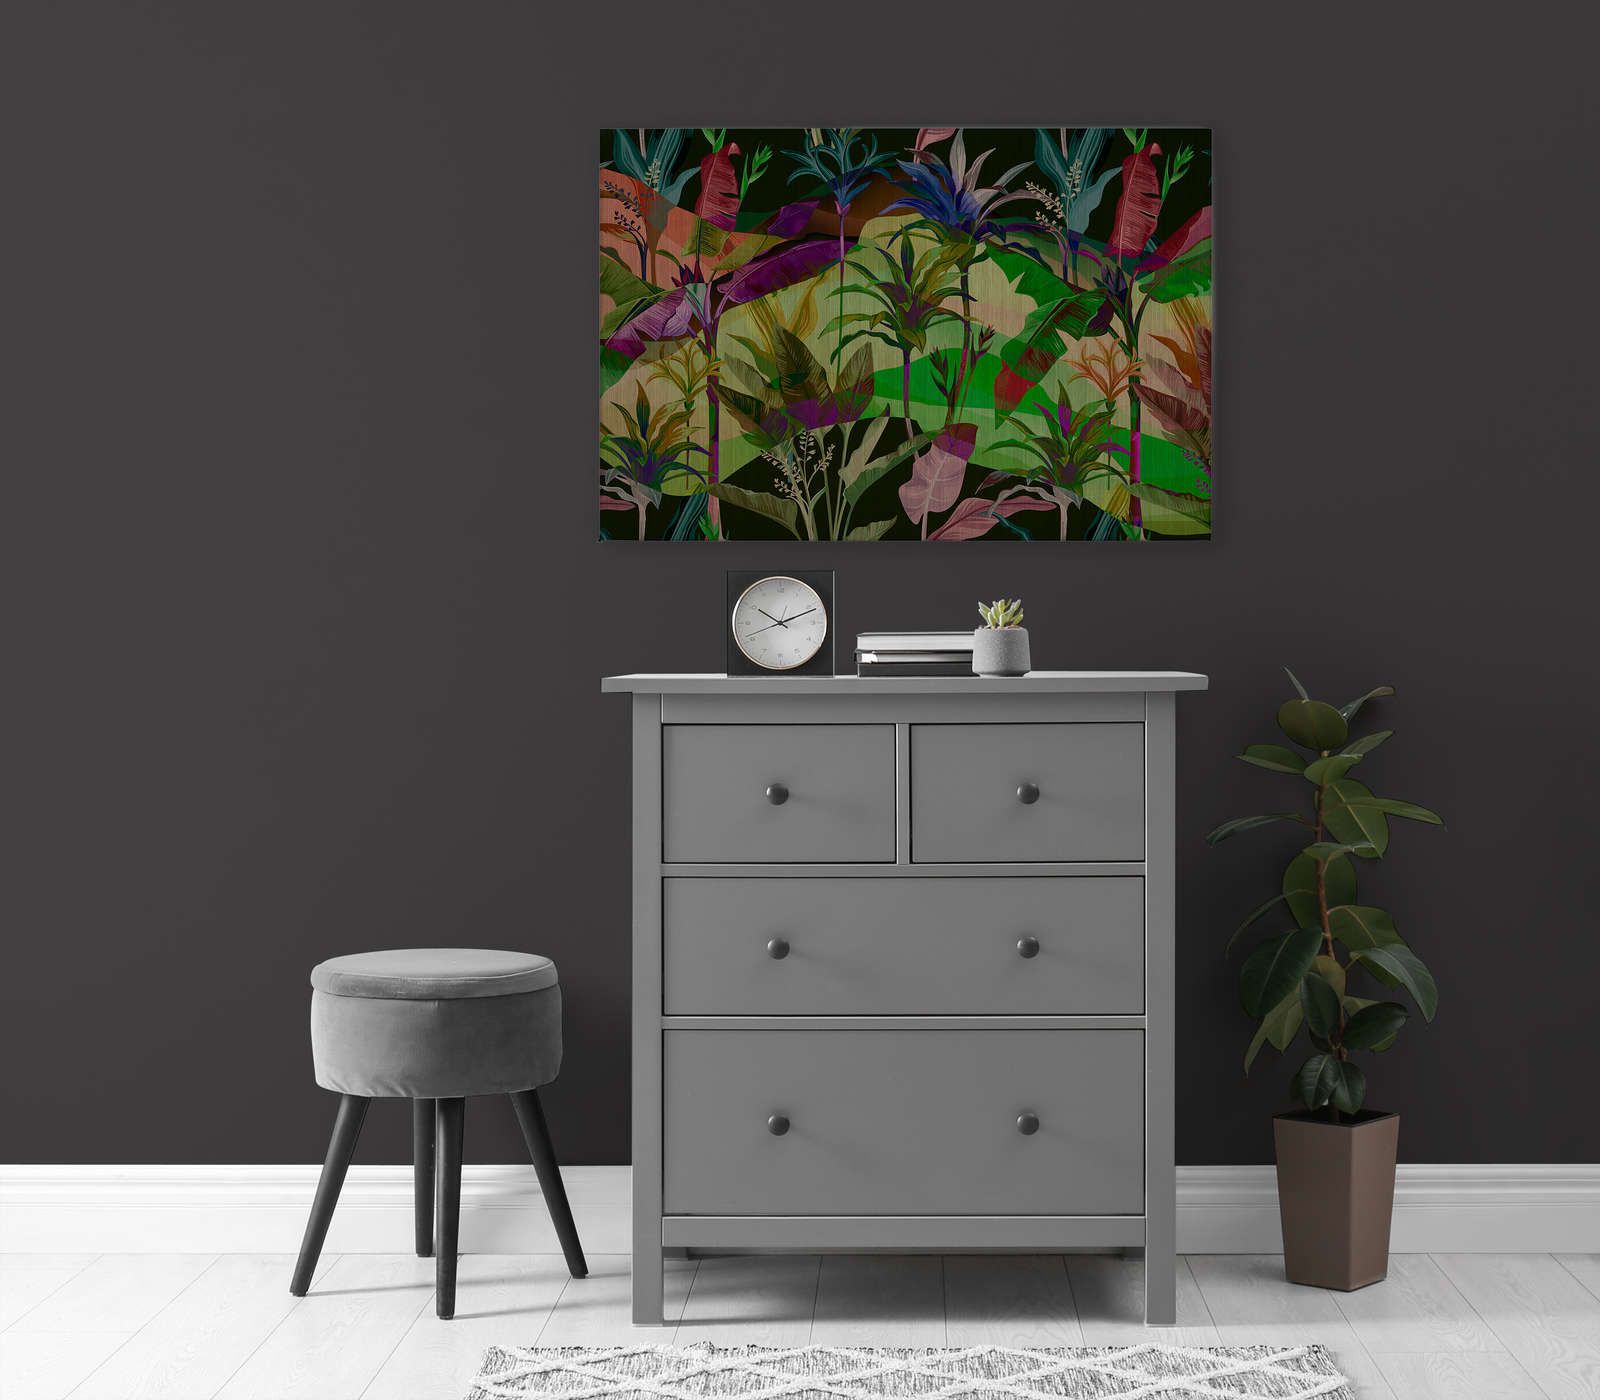             Palmyra 2 - Canvas painting Jungle leaves colourful design - 0,90 m x 0,60 m
        